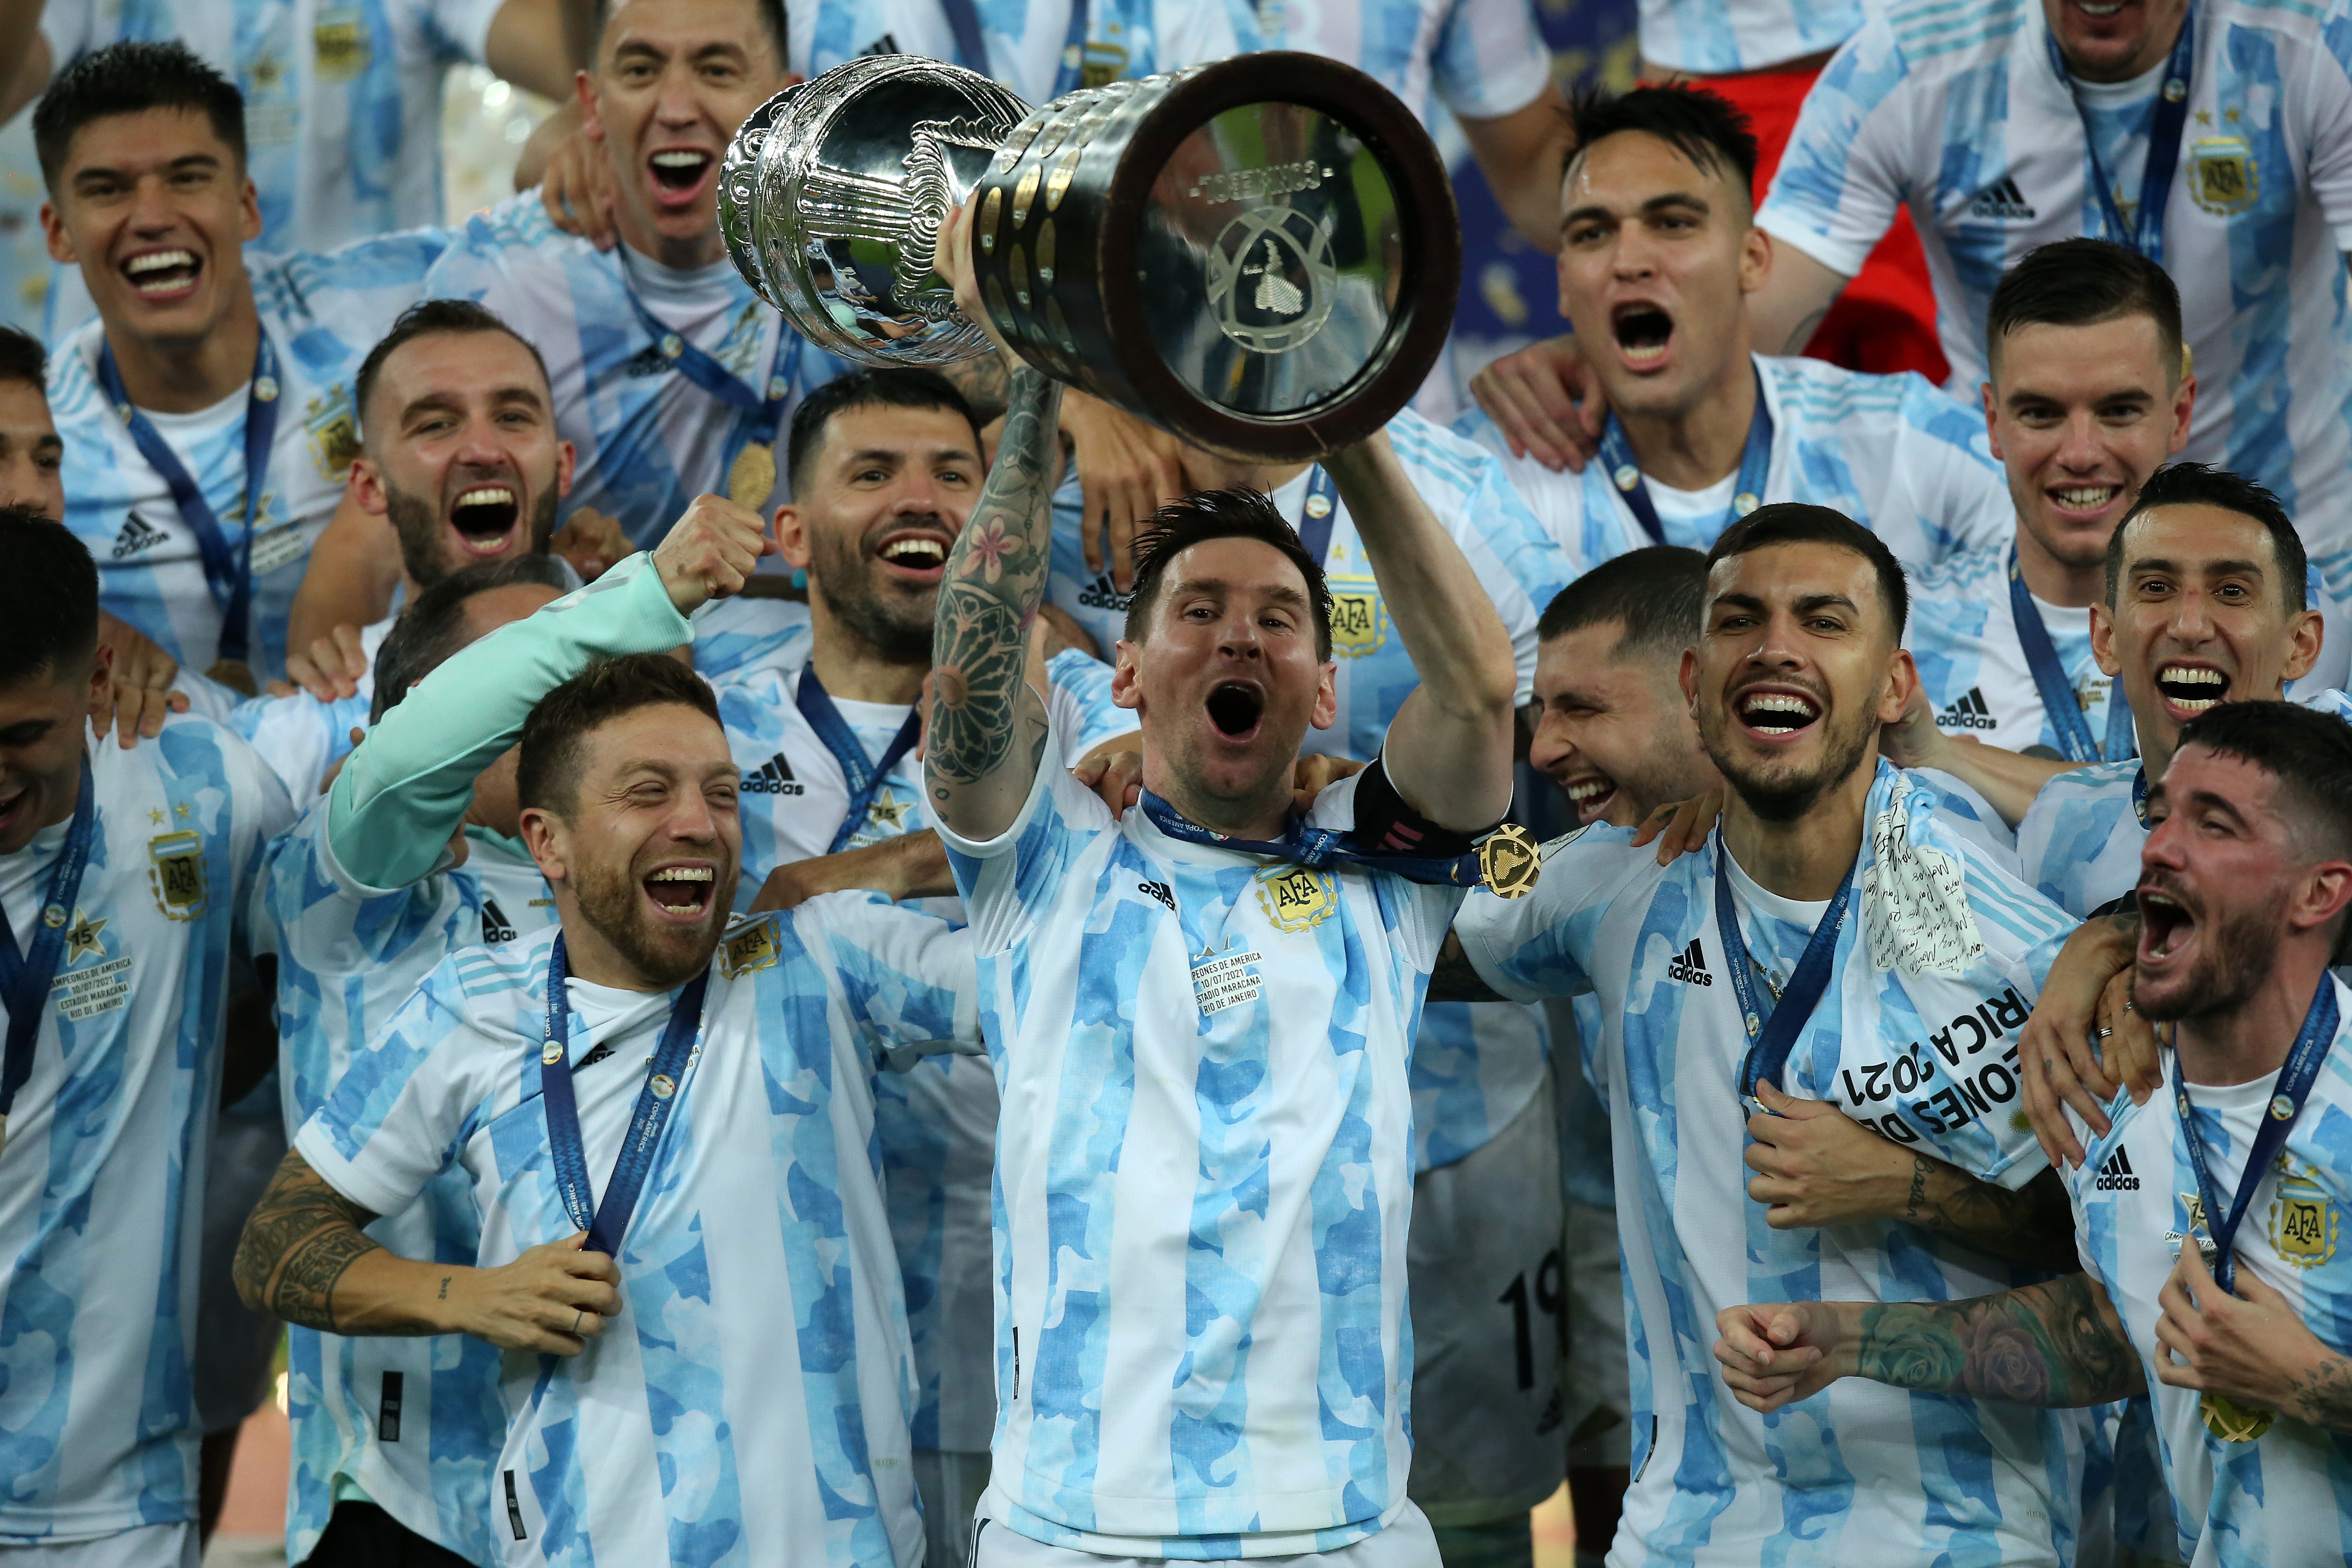 Argentina are the defending champions